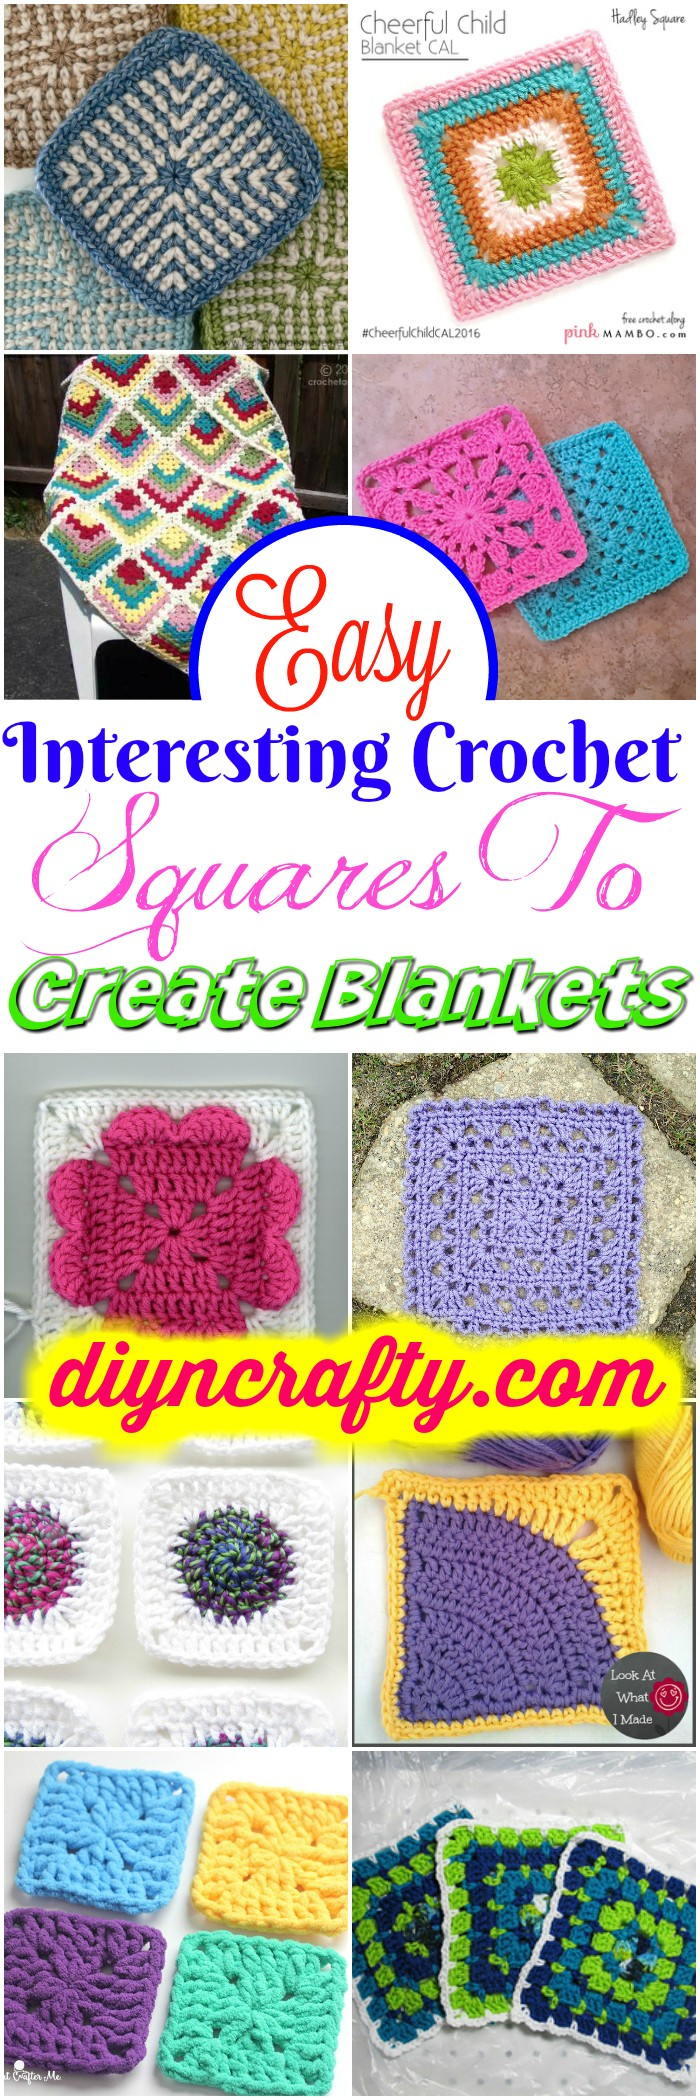 Crochet Squares Patterns Crochet Squares Patterns To Create Blankets